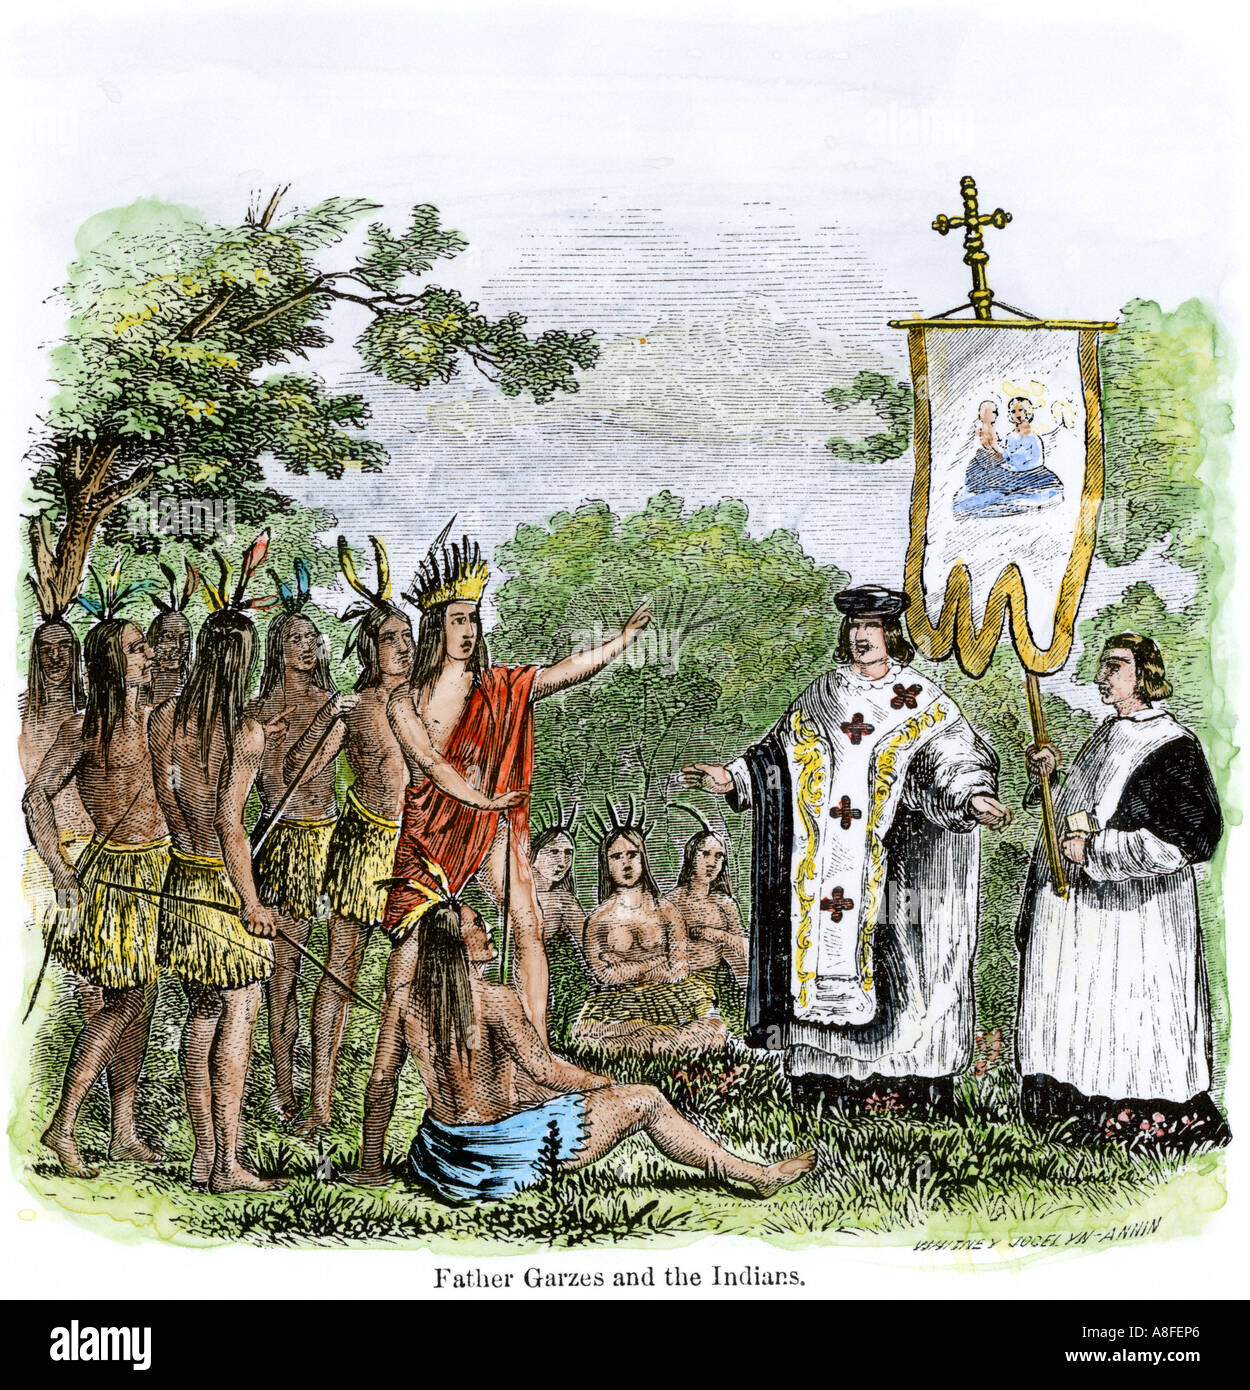 Spanish missionary Father Garces teaching Native Americans